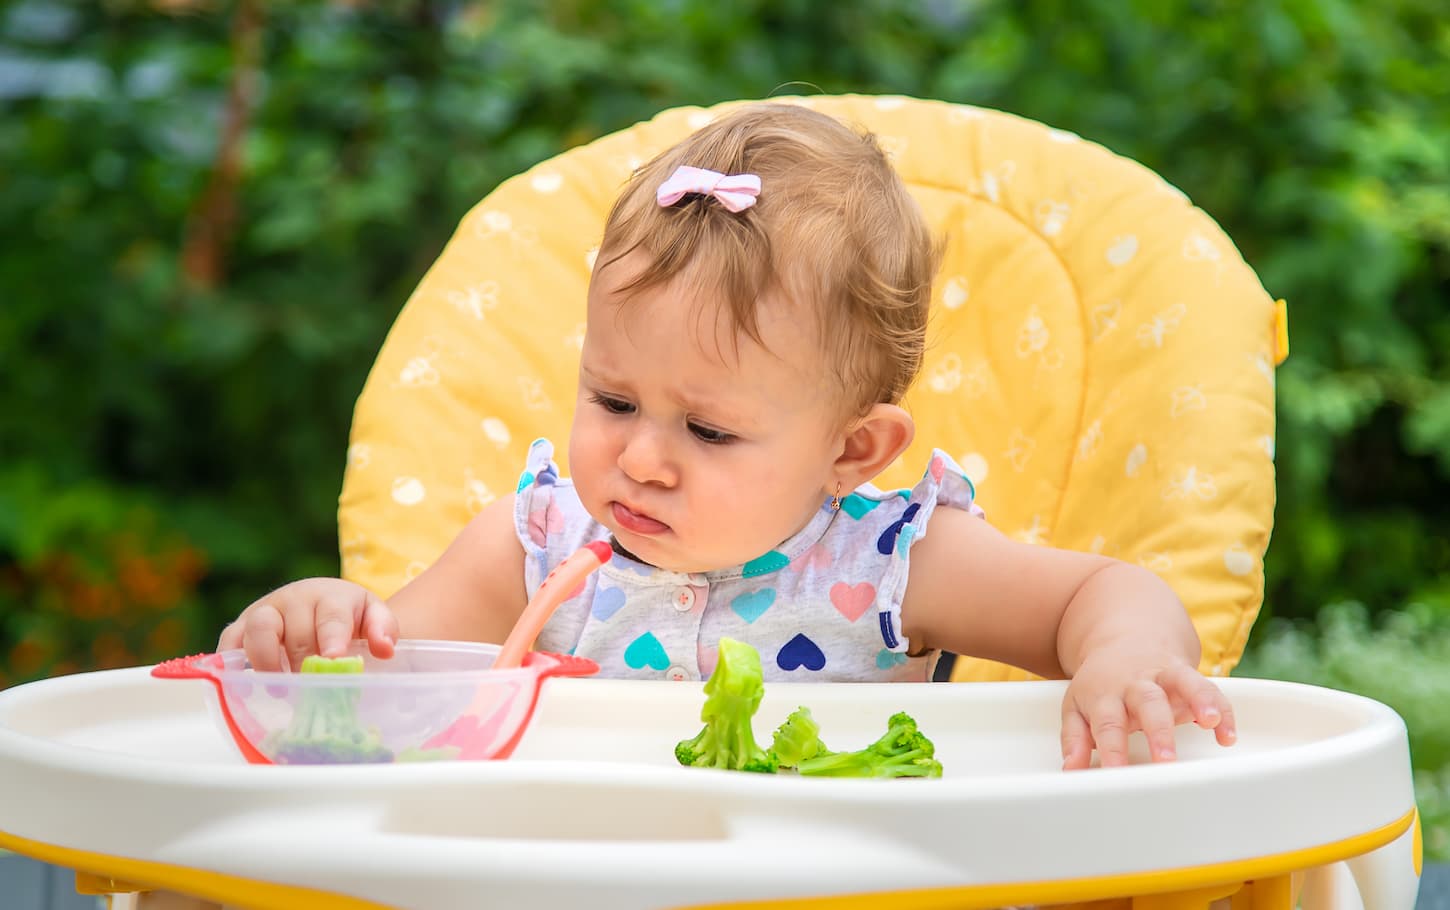 An image of Baby eating pieces of broccoli vegetables.